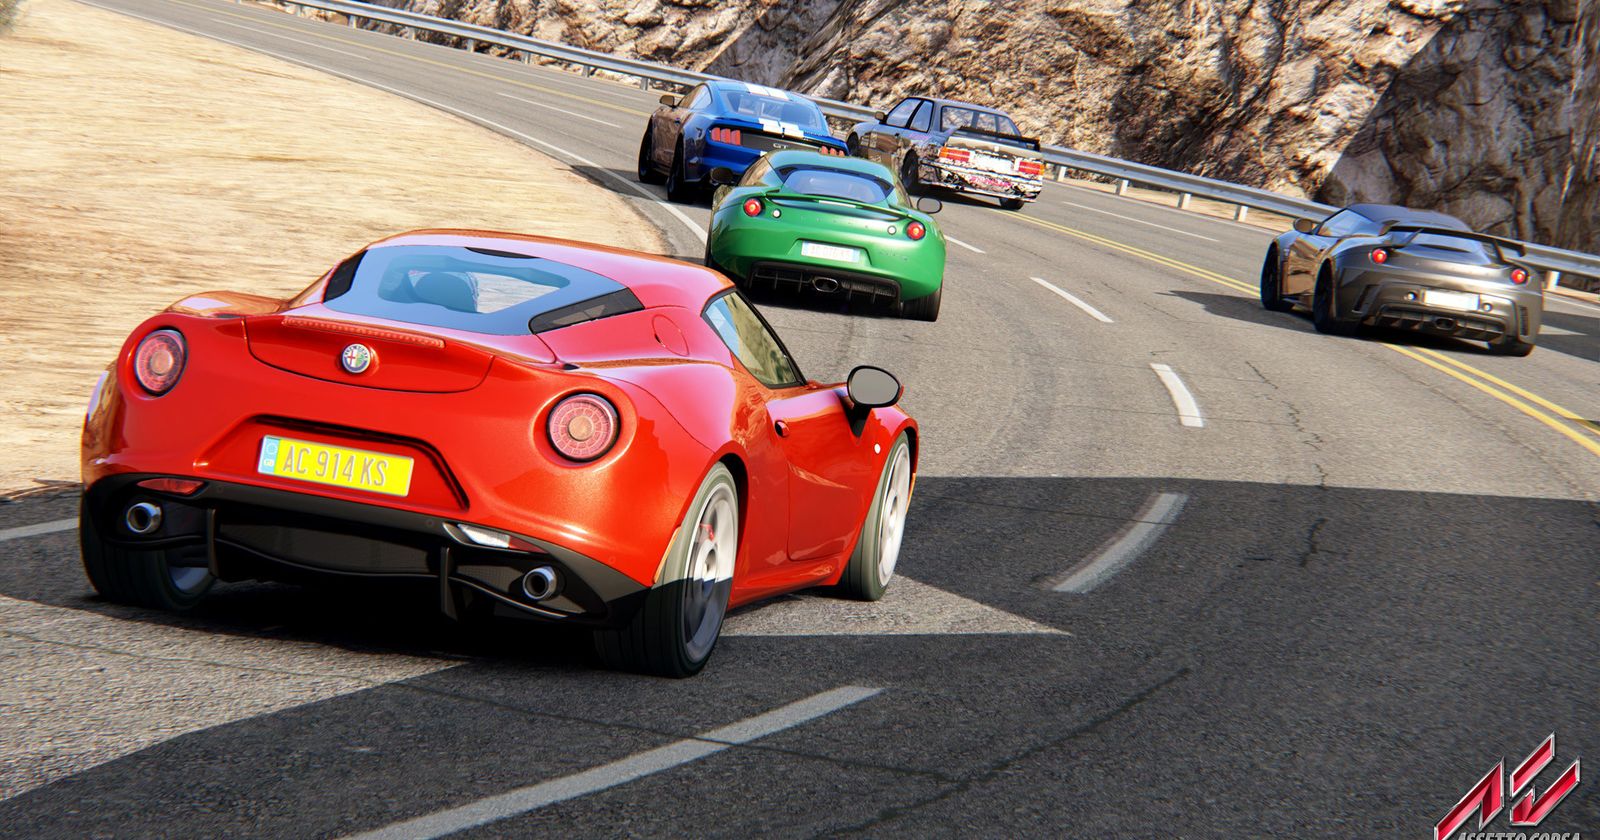 Assetto Corsa 2 Release Date: When is Assetto Corsa 2 coming out?